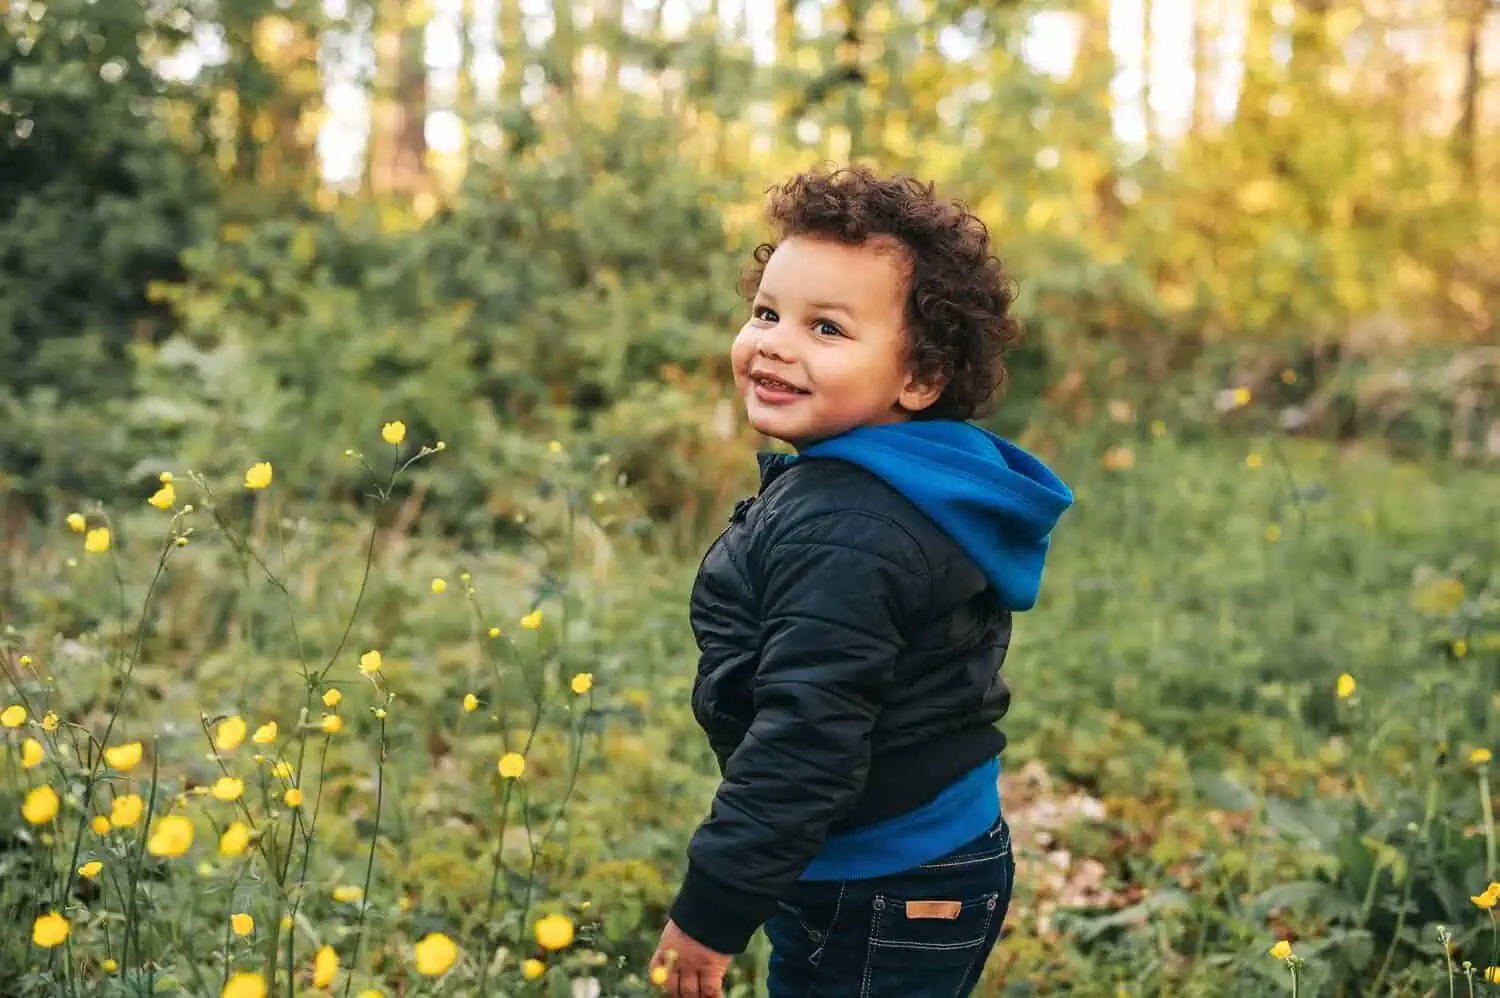 Adorable african toddler boy hiking in spring forest